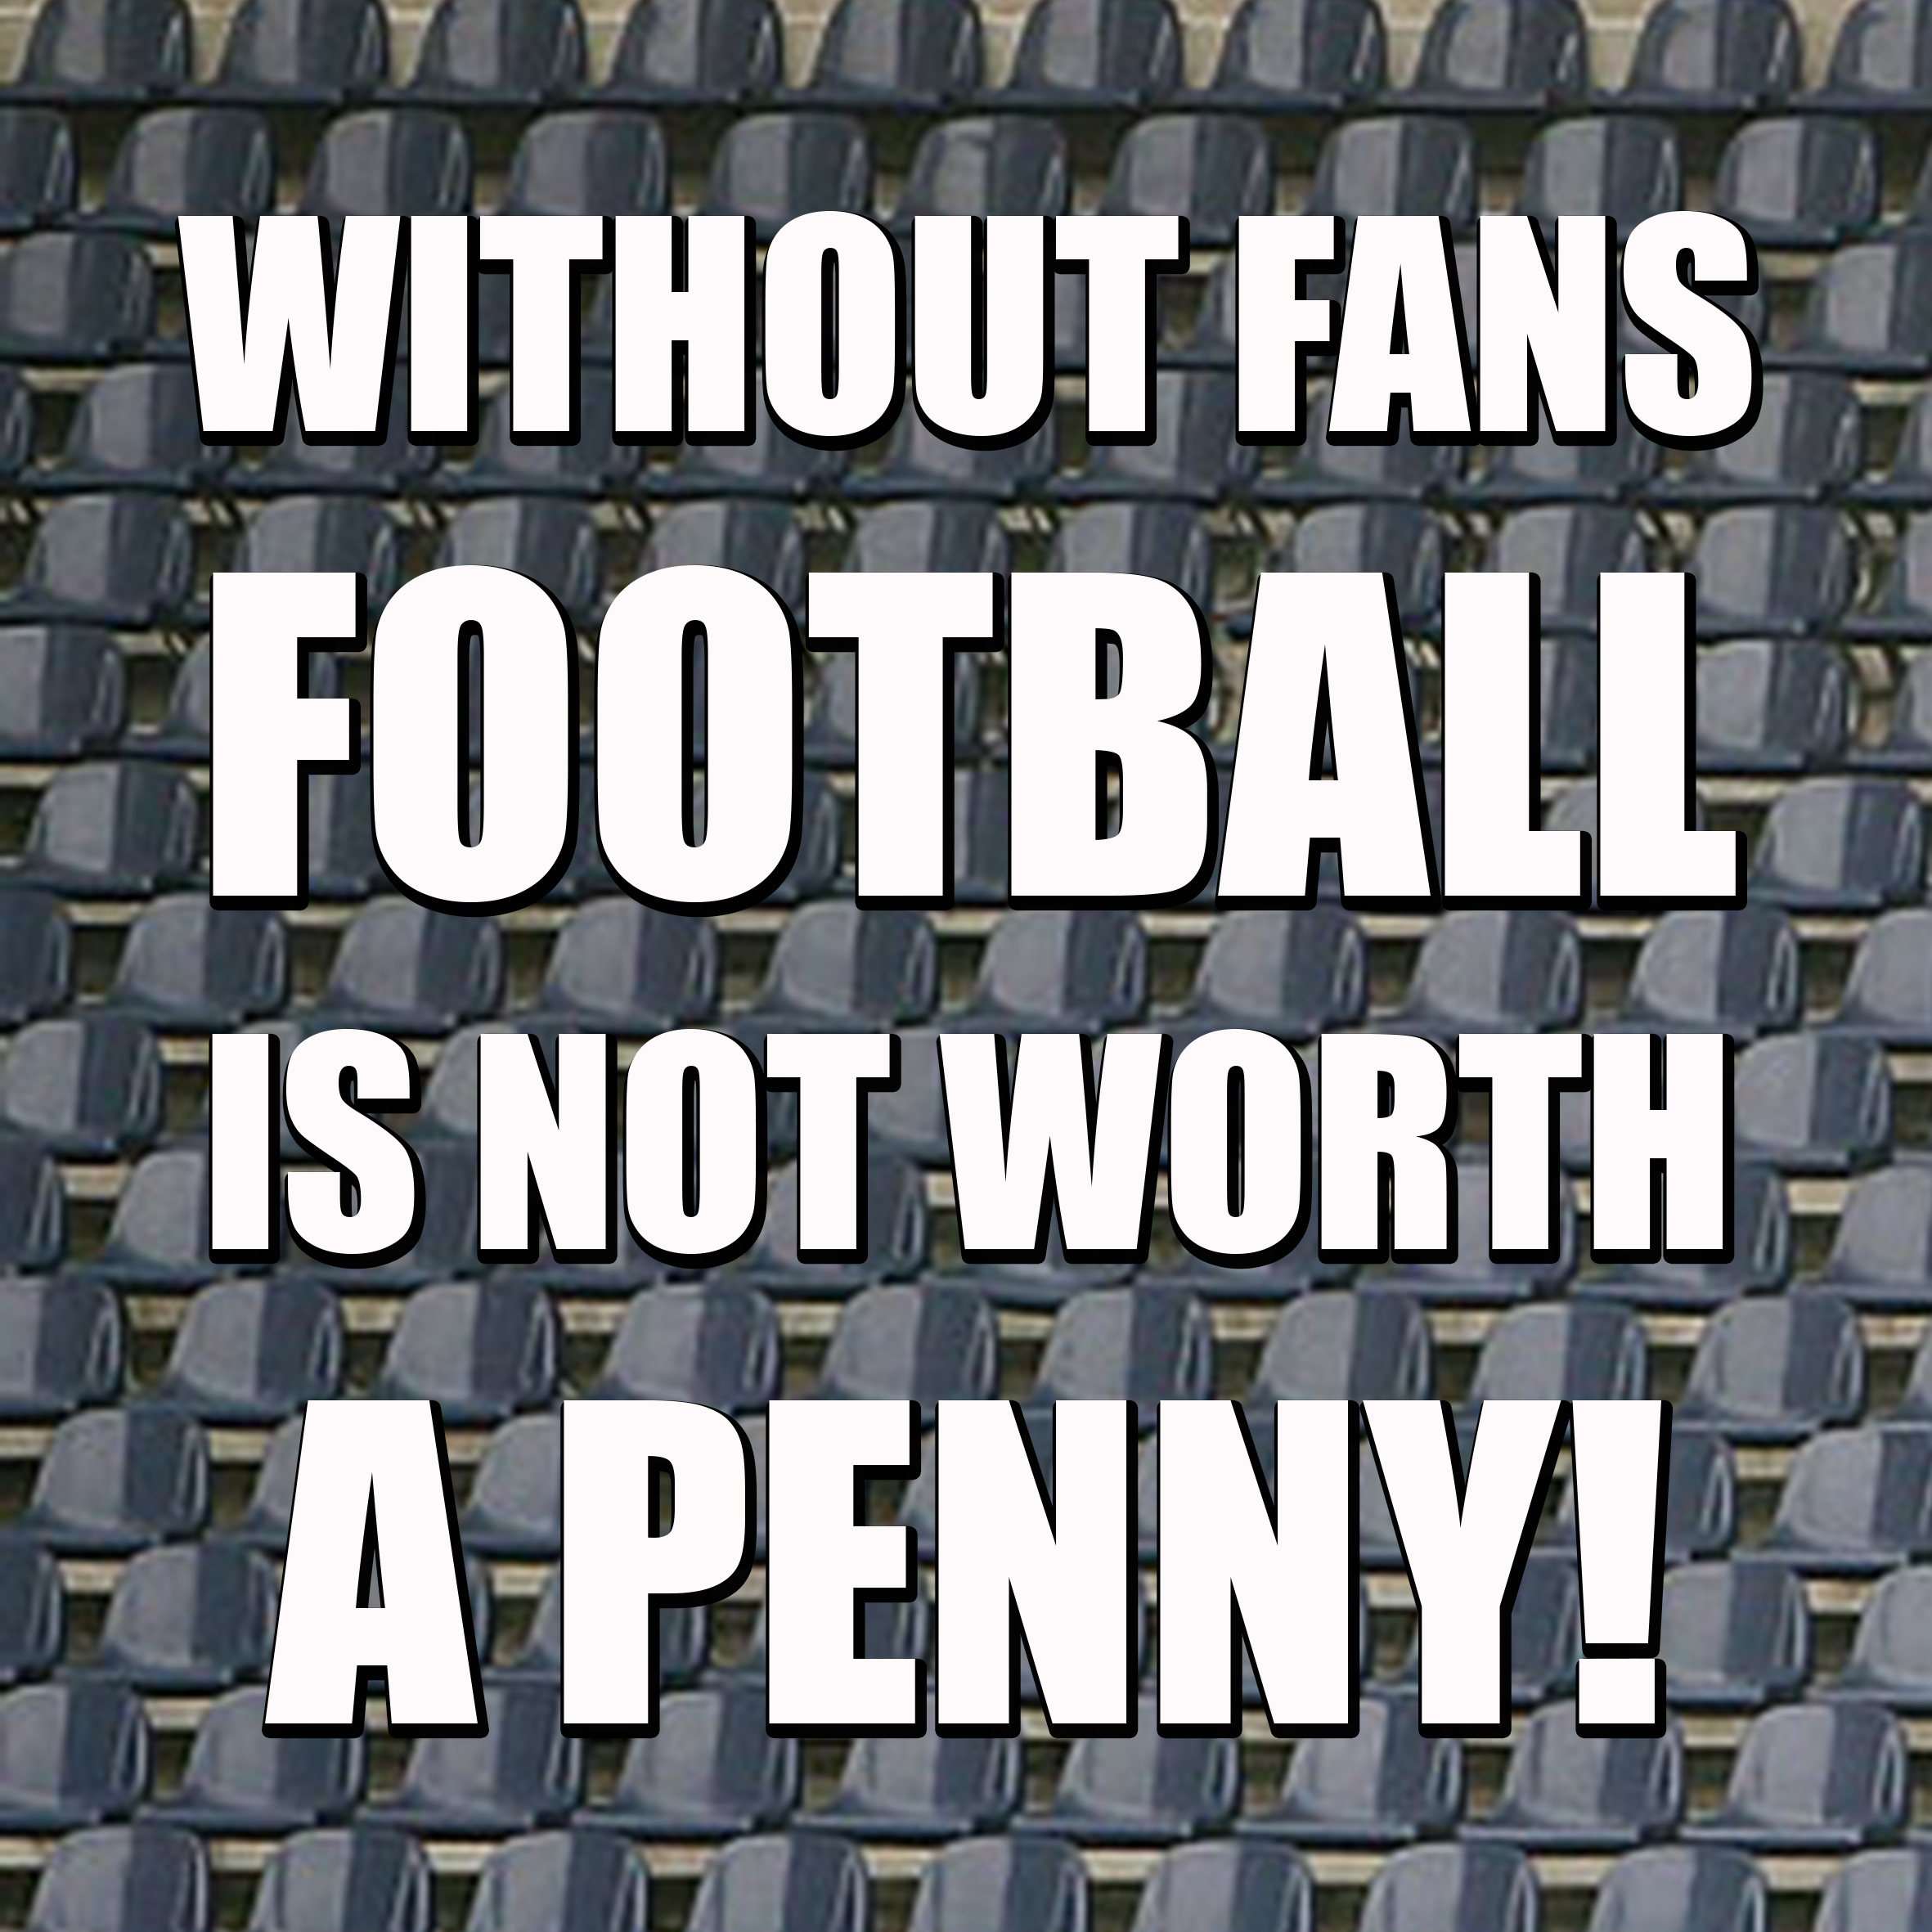 Without Fans Football Is Not Worth A Penny